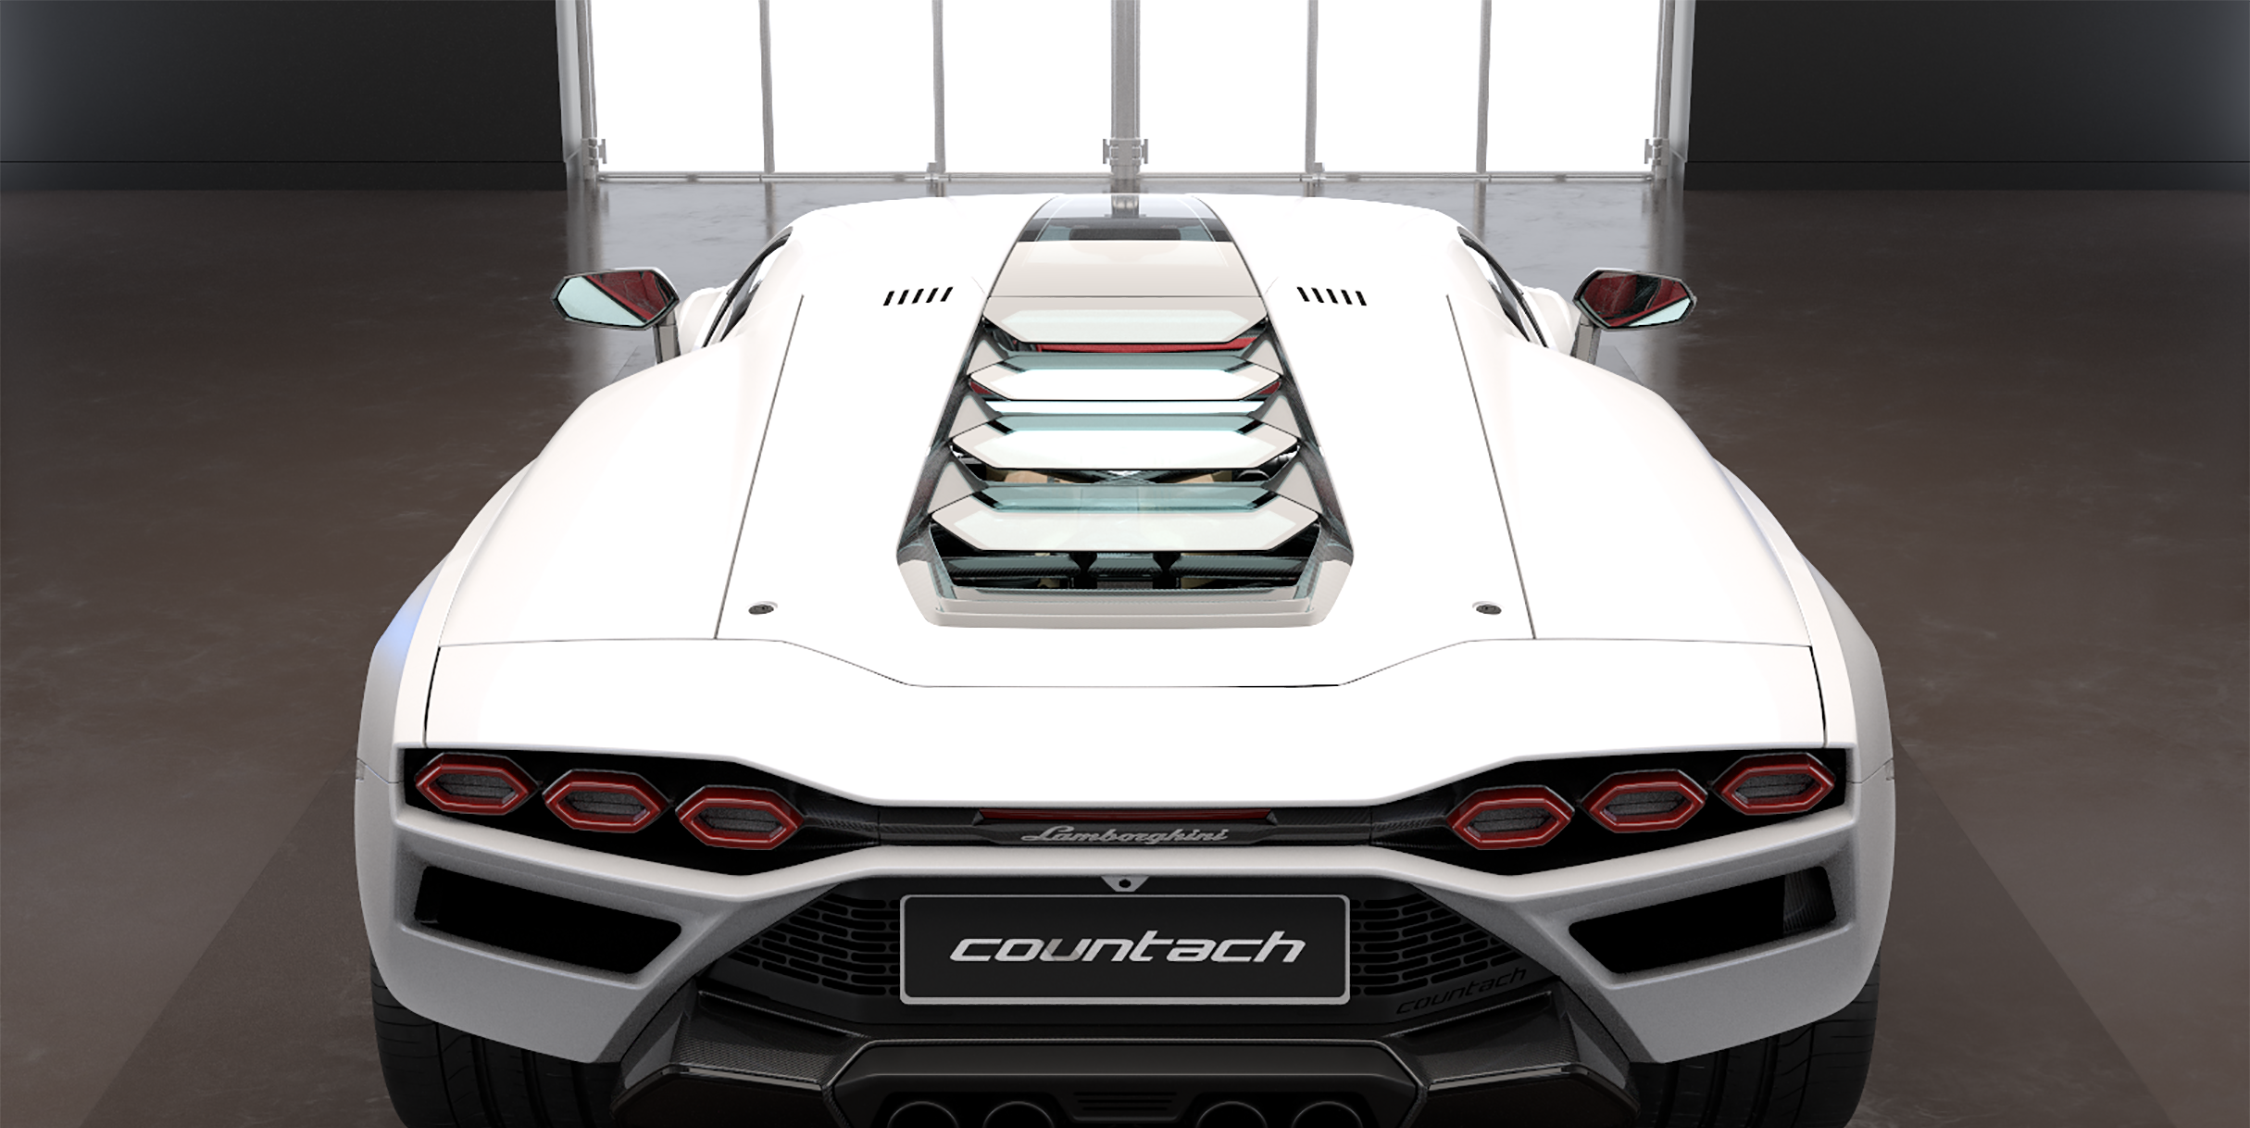 Lamborghini Recalls New Countach Because Glass Engine Cover Could Go Flying